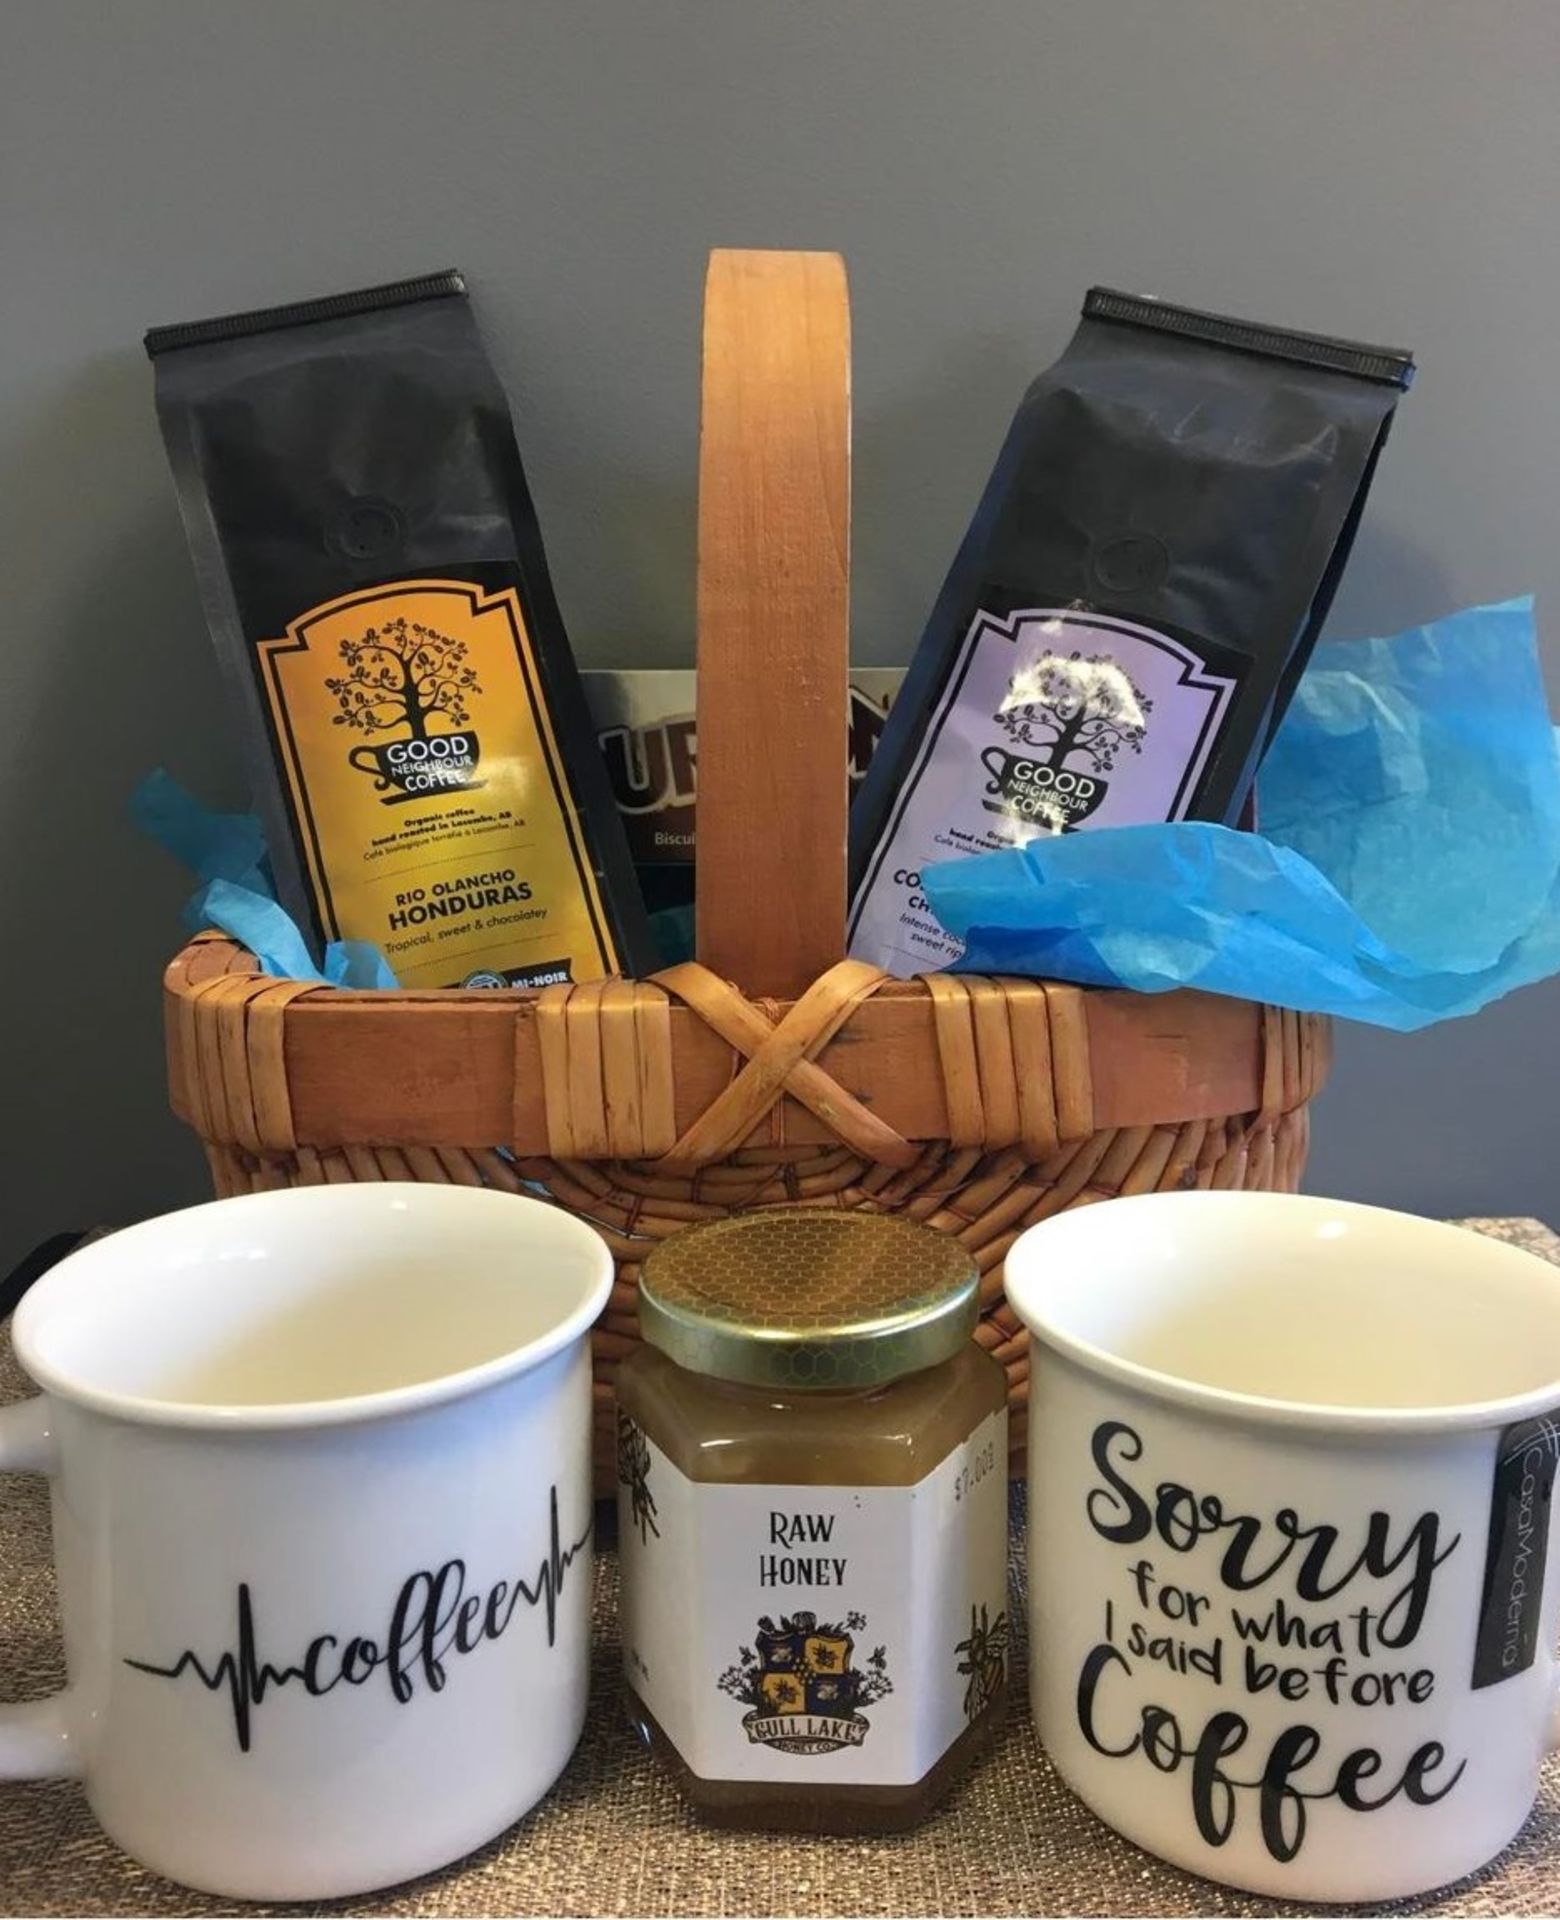 Coffee Lovers Basket - Donated By: Fahey's Fruit Stand - Retail Value: 50